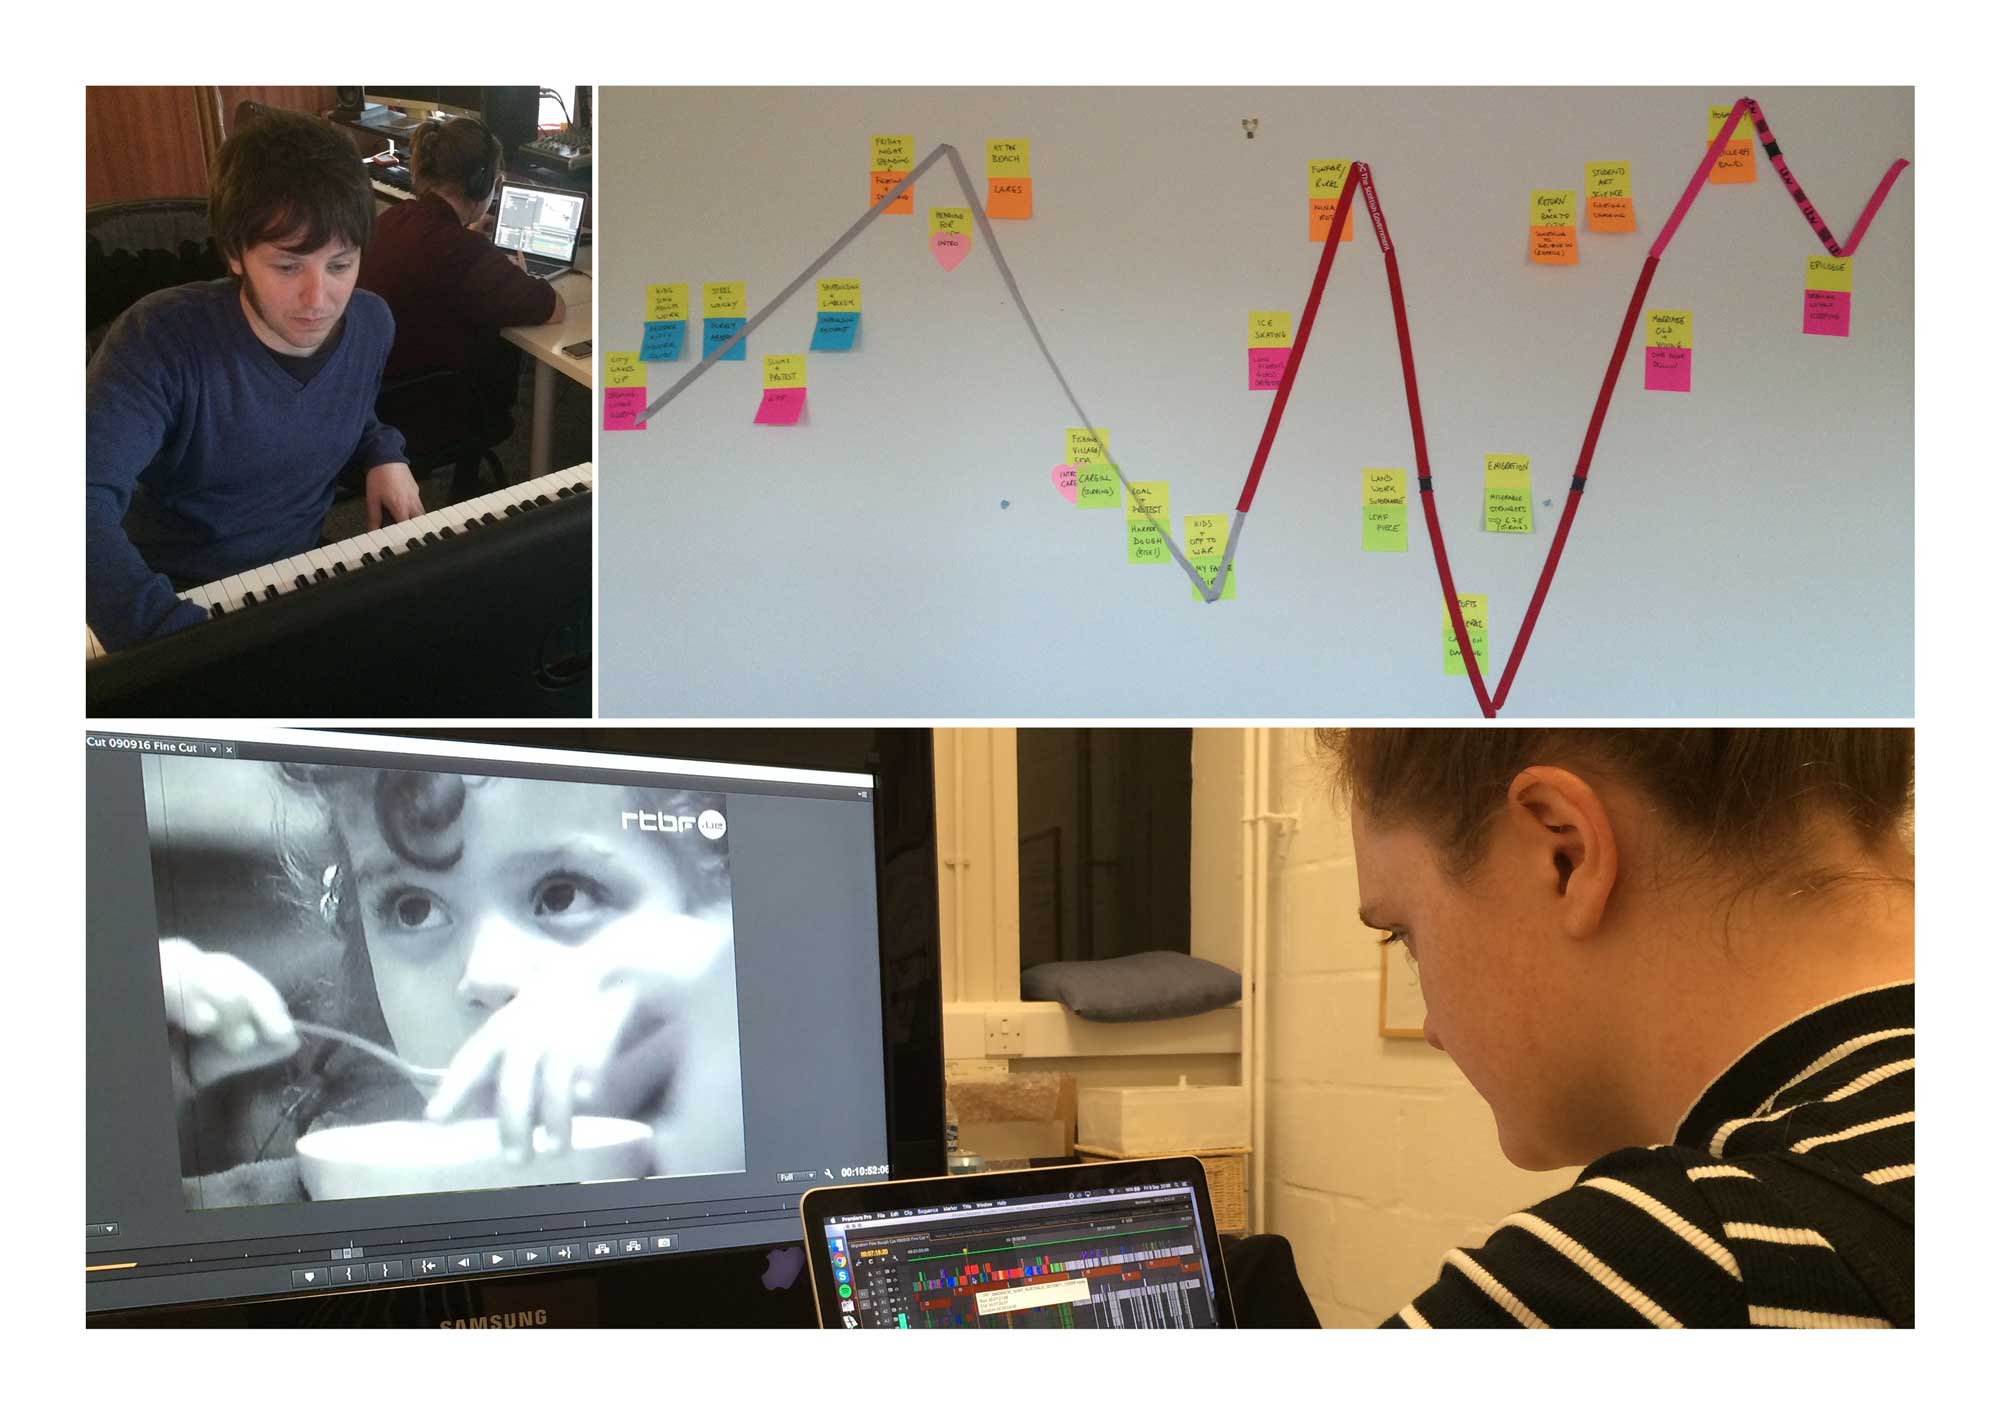 Composer working in sync with editors on Virginia Heath's 'We Are All Migrants', with emotional temperature map image